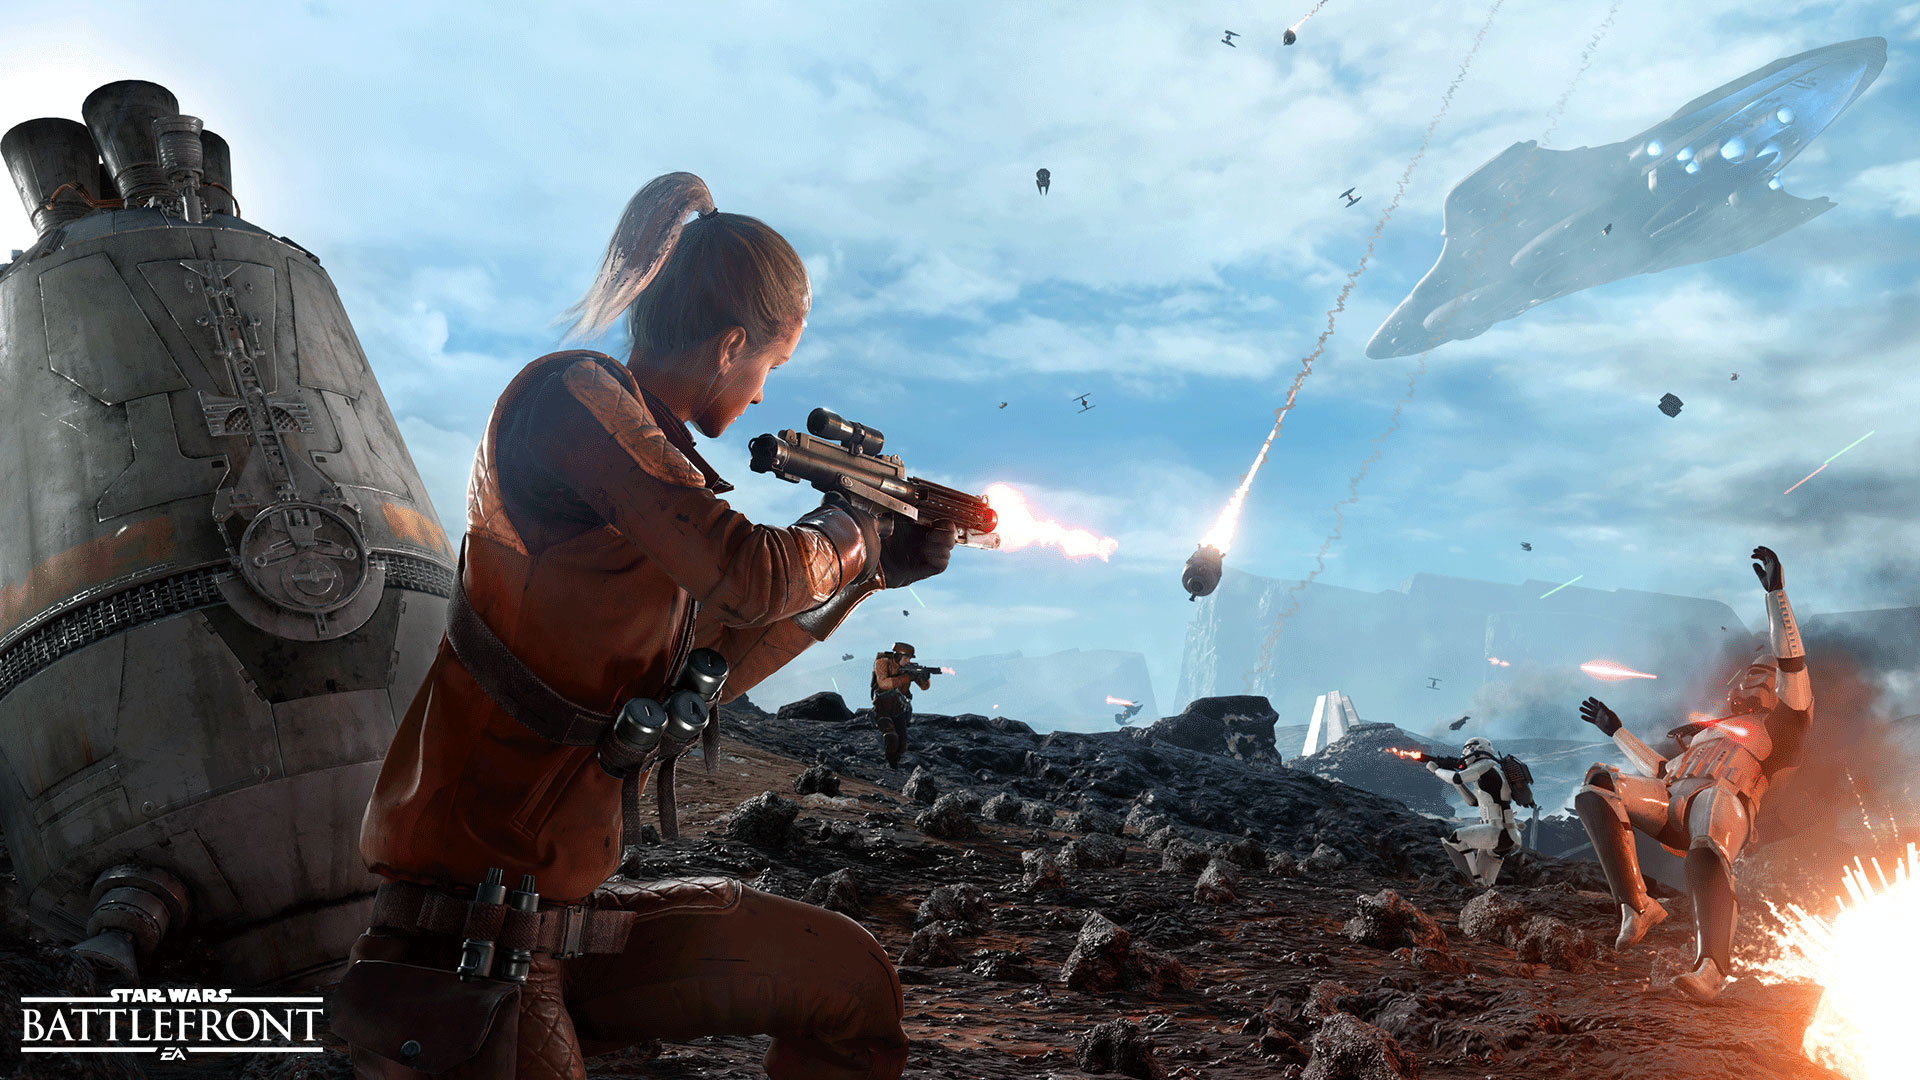 Battlefront Will Have an In-Game Diorama